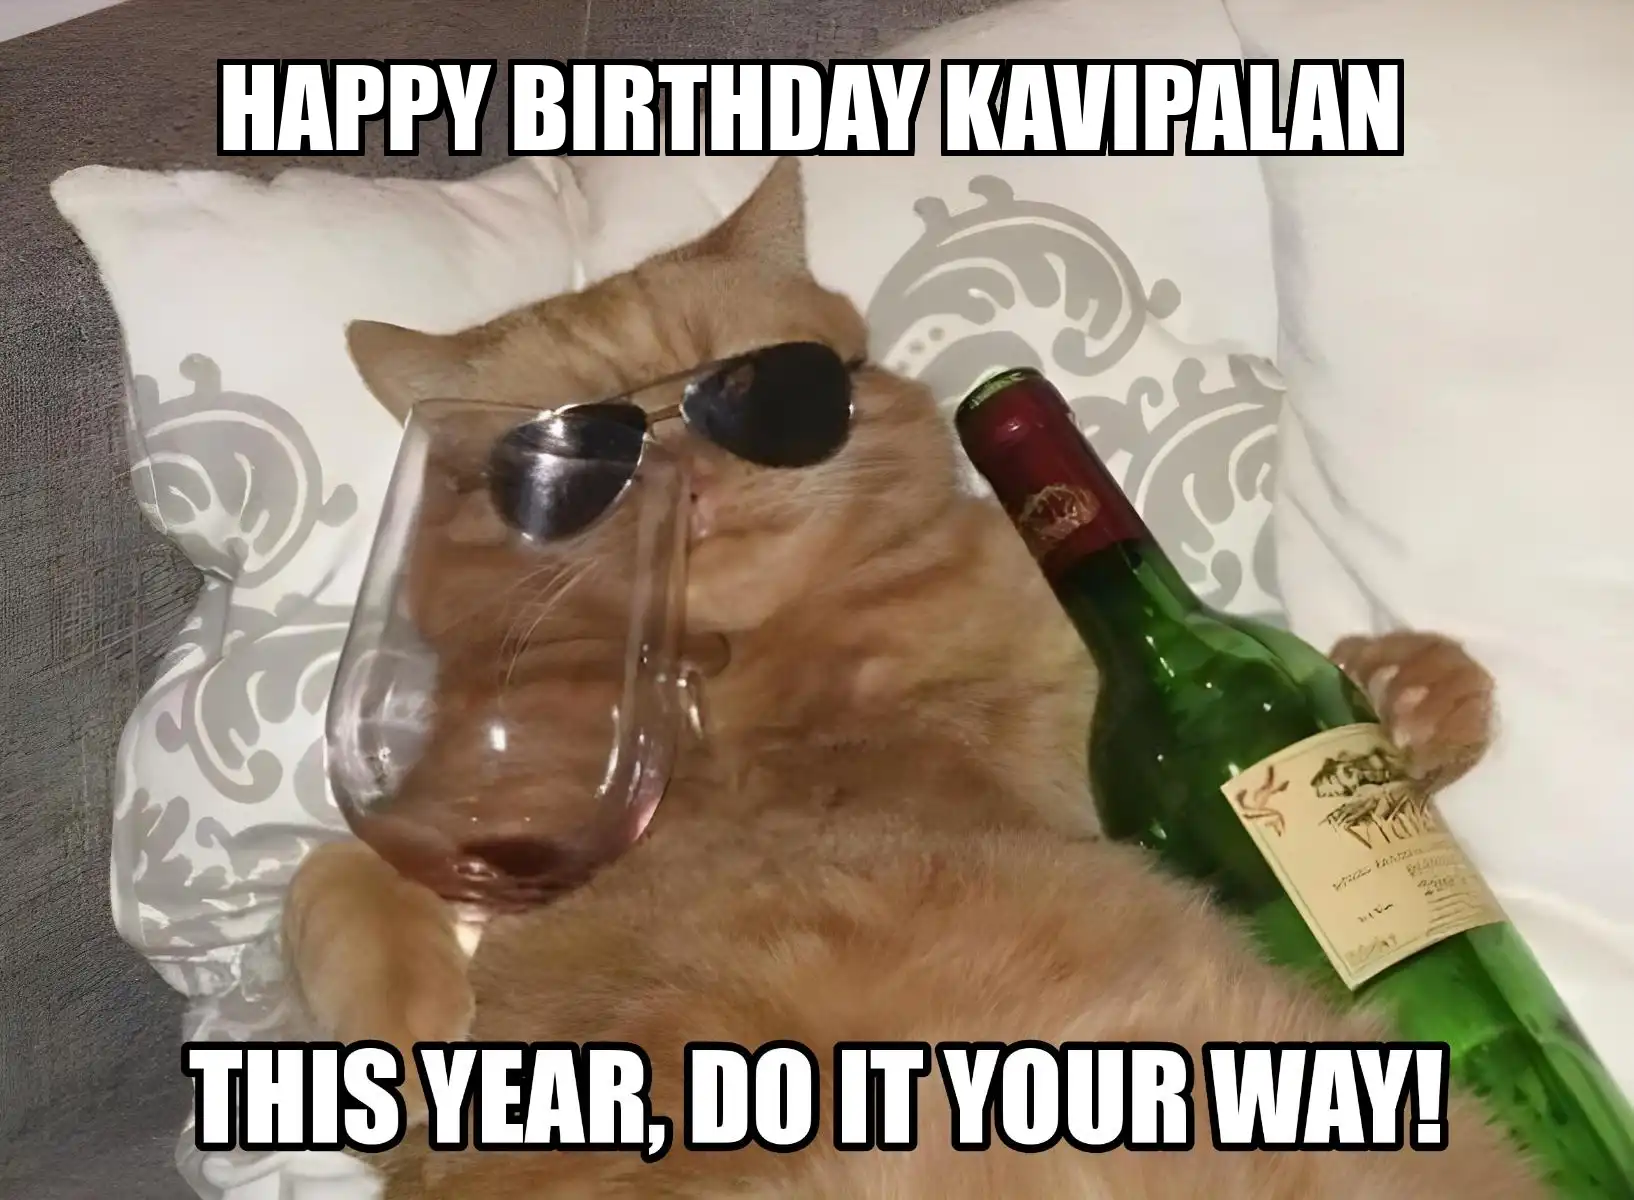 Happy Birthday Kavipalan This Year Do It Your Way Meme